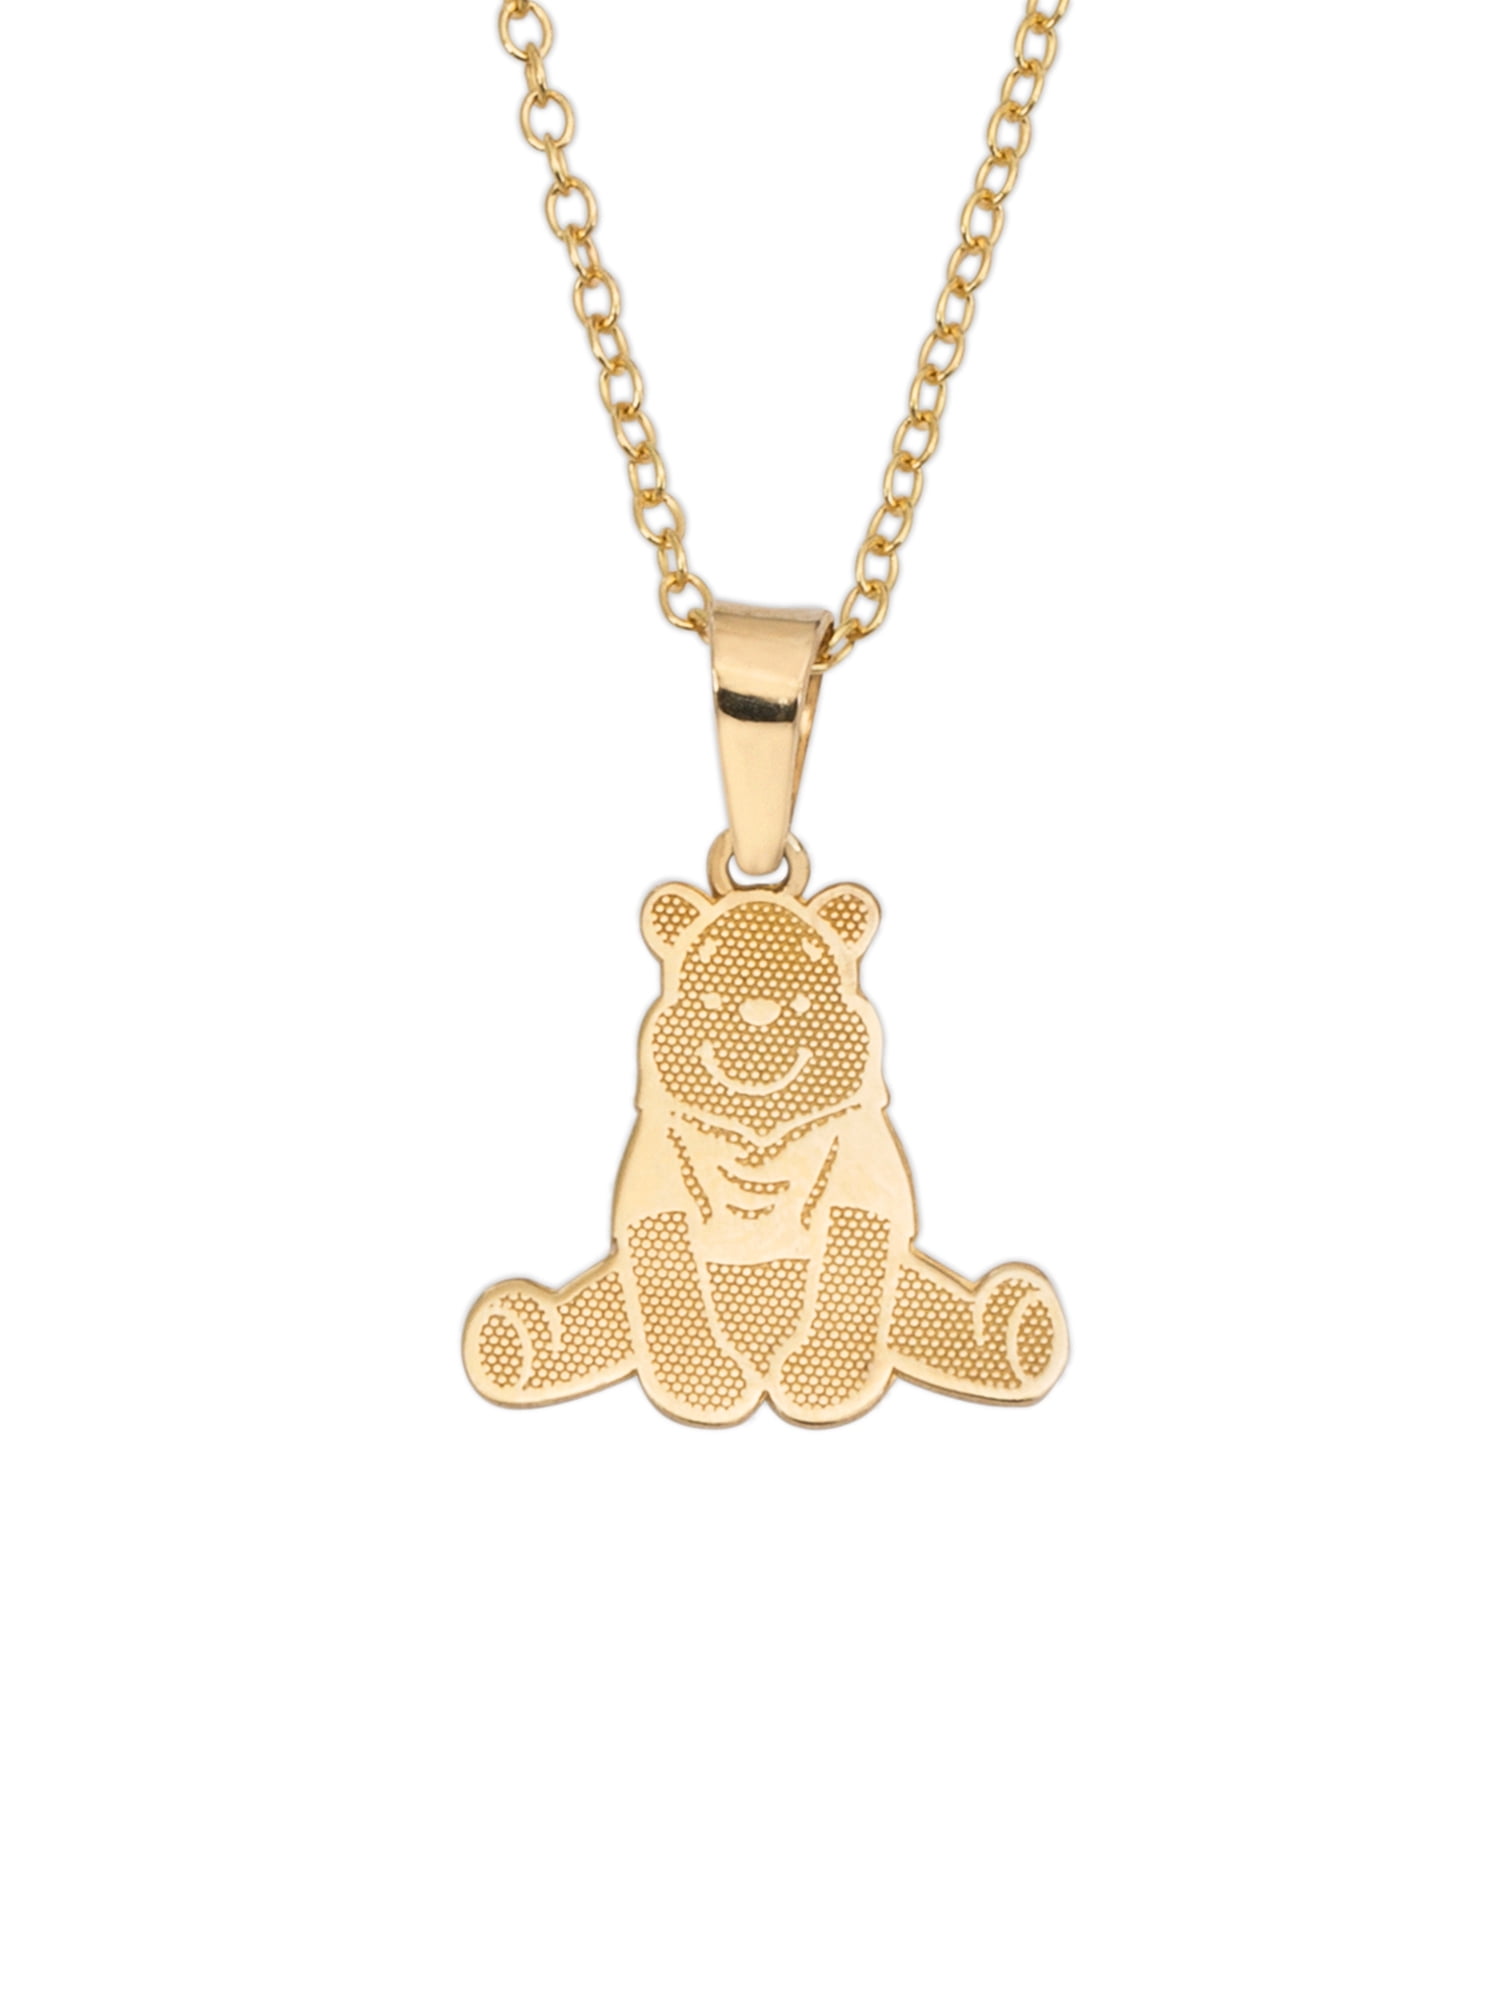 Winnie the Pooh Baby Sleeping Silver Gift Jewelry Disney Pendant Necklace 